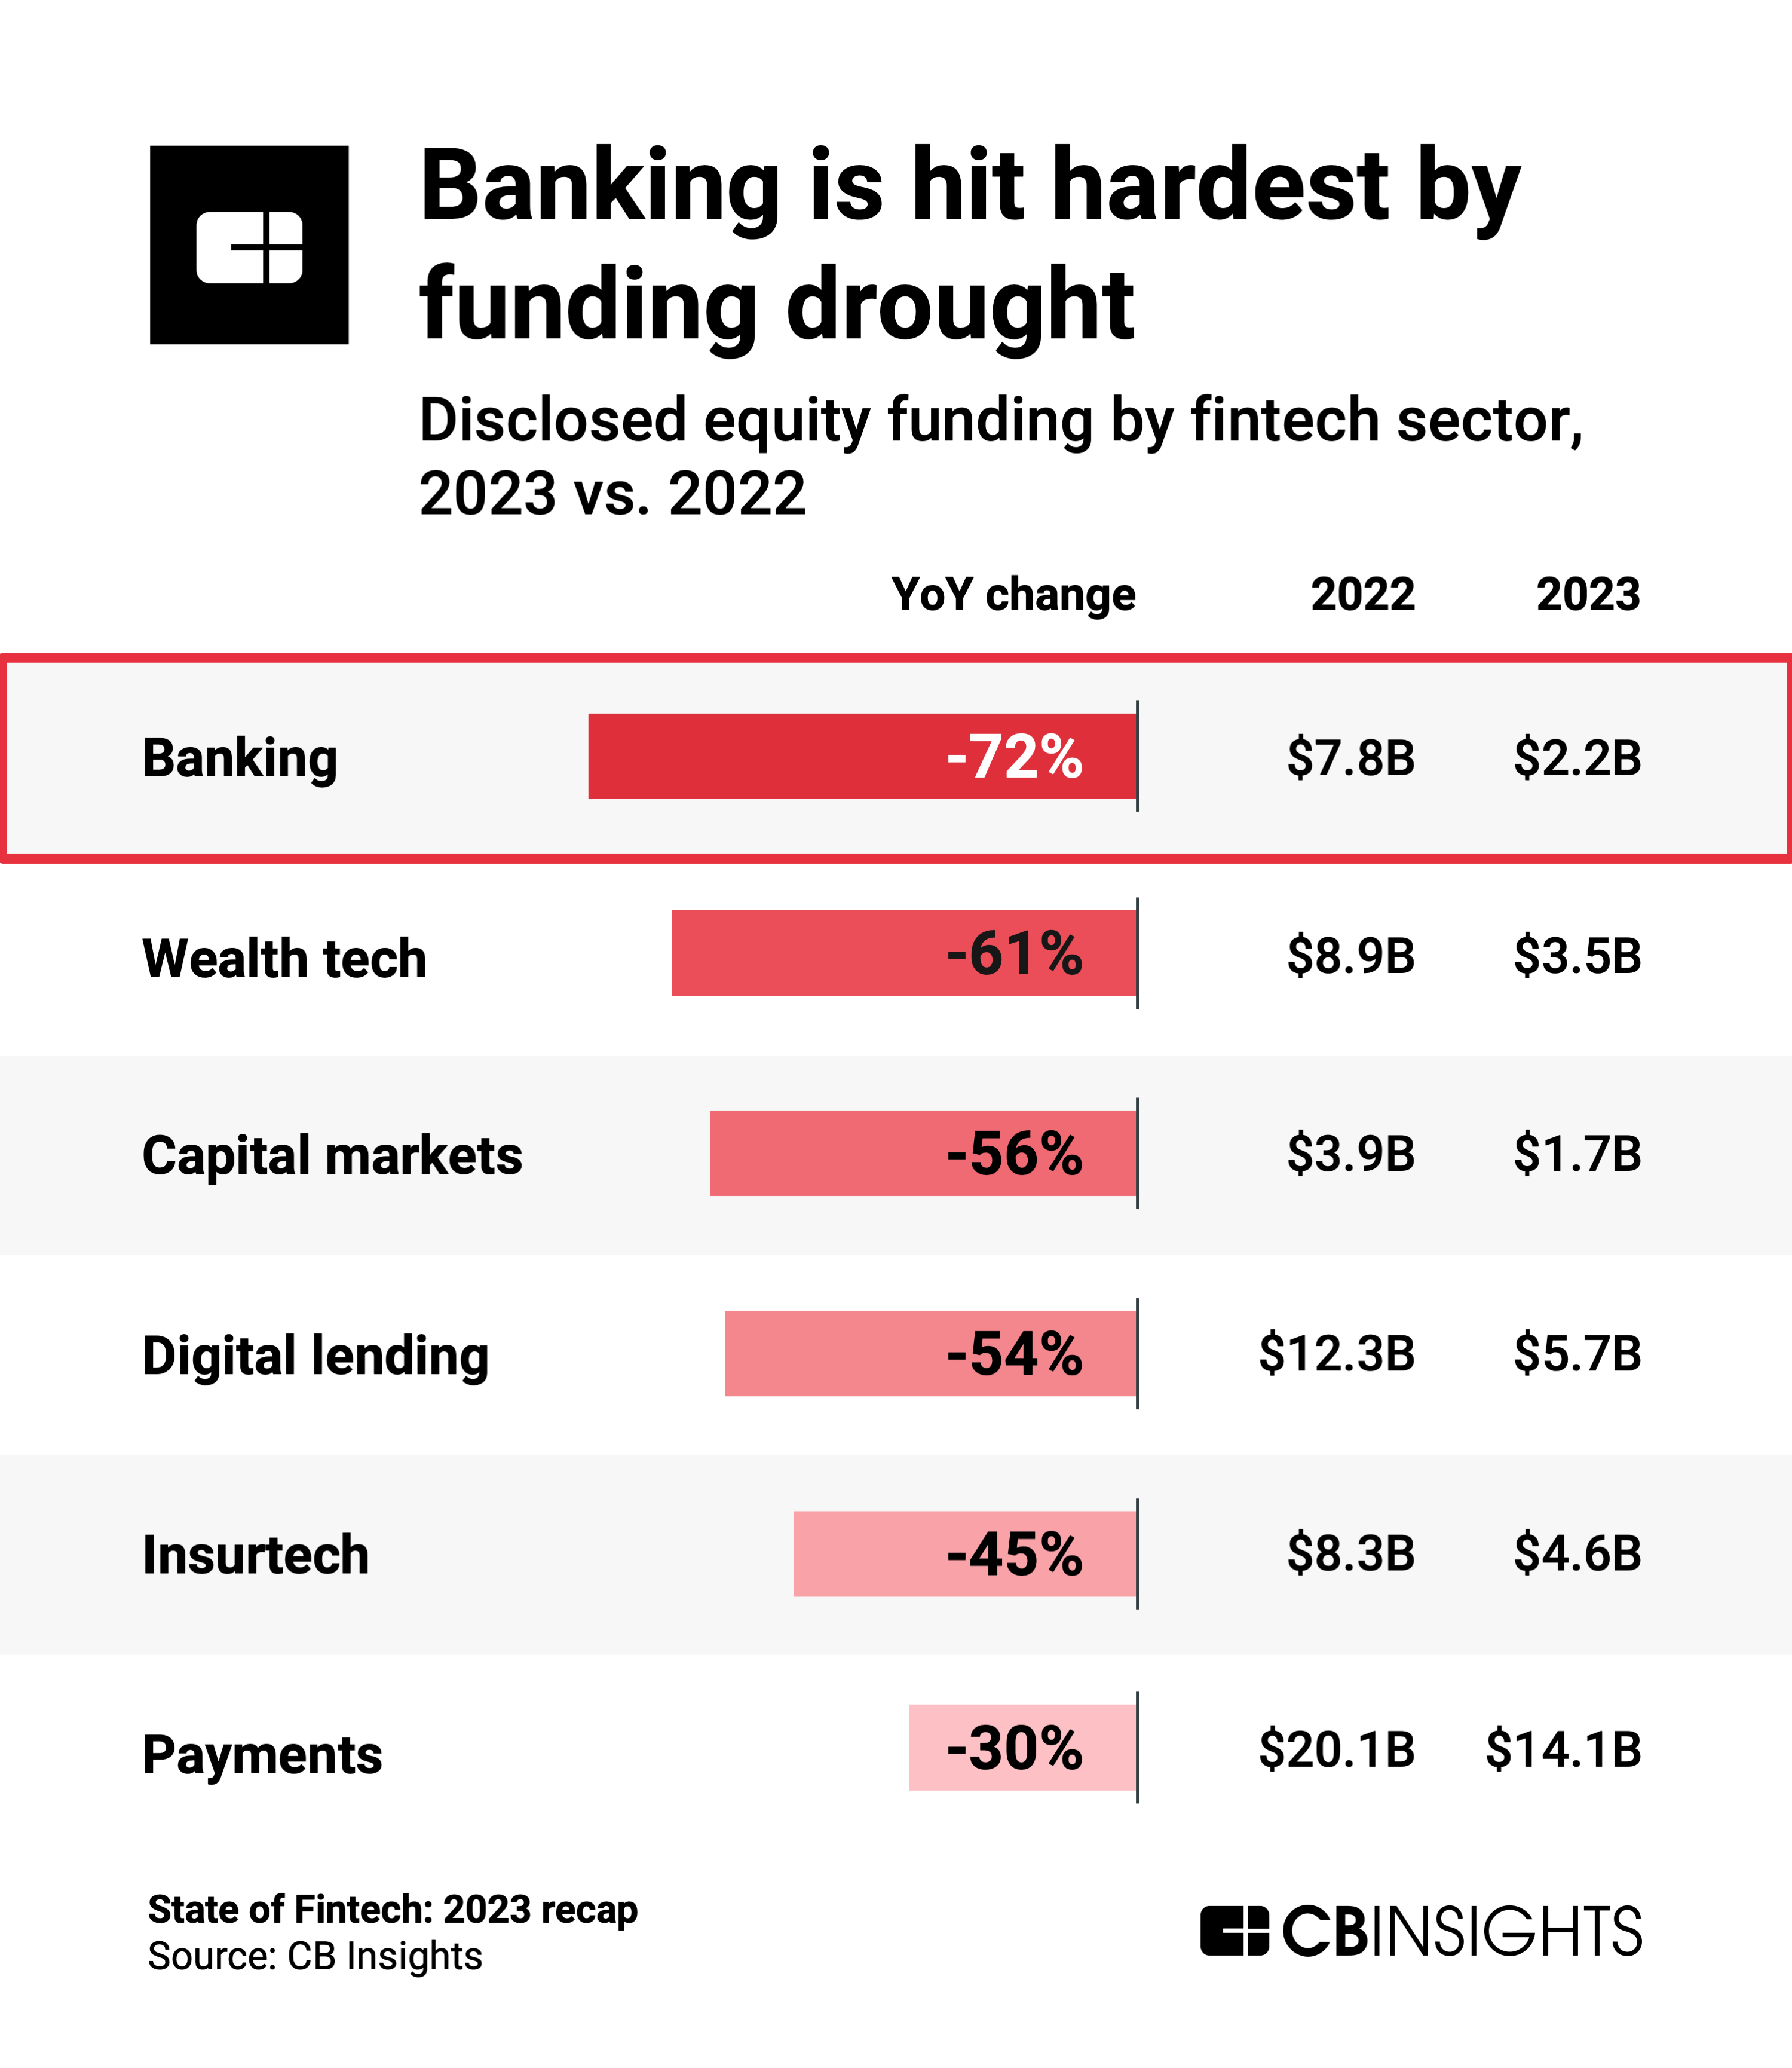 Banking is hit hardest by funding drought